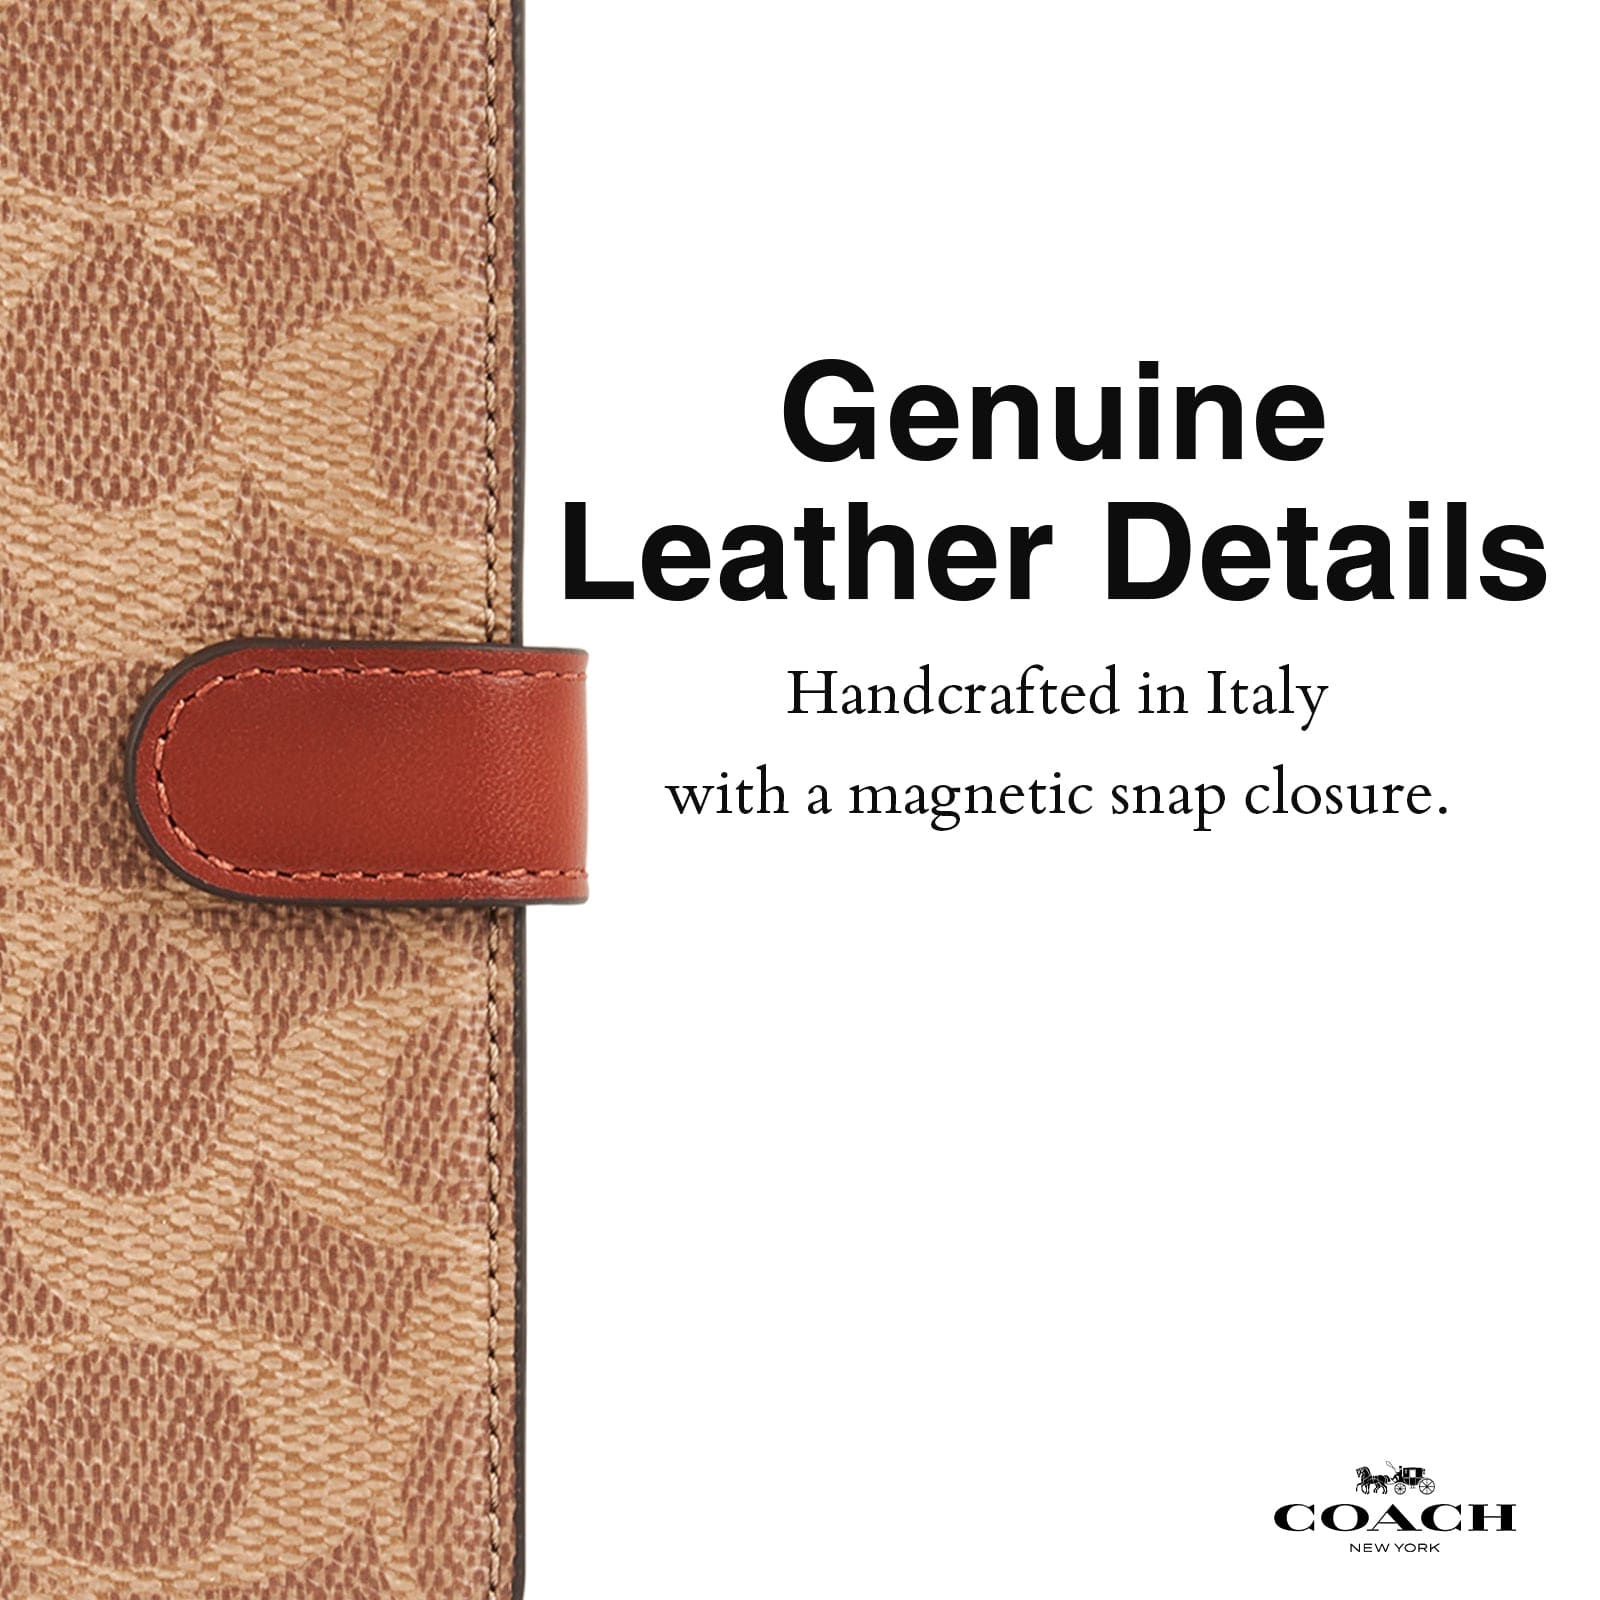 GENUINE LEATHER DETAILS. HANDCRAFTED IN ITALY WITH A MAGNETIC SNAP CLOSURE. 